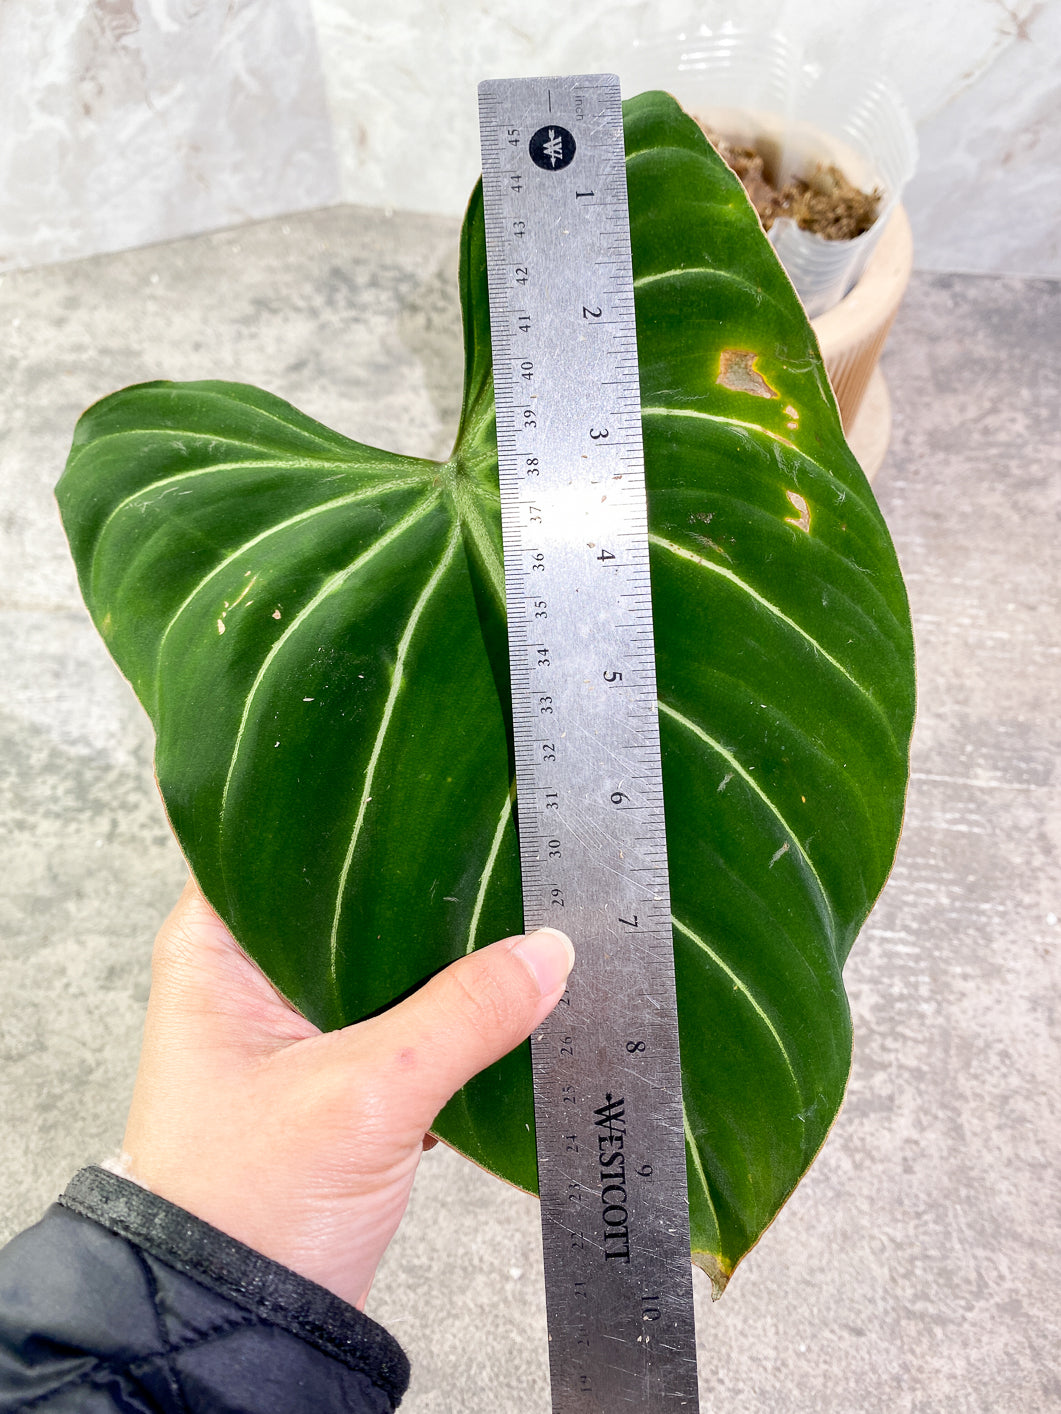 Philodendron Gloriosum Zebra 1 big leaf Rooted